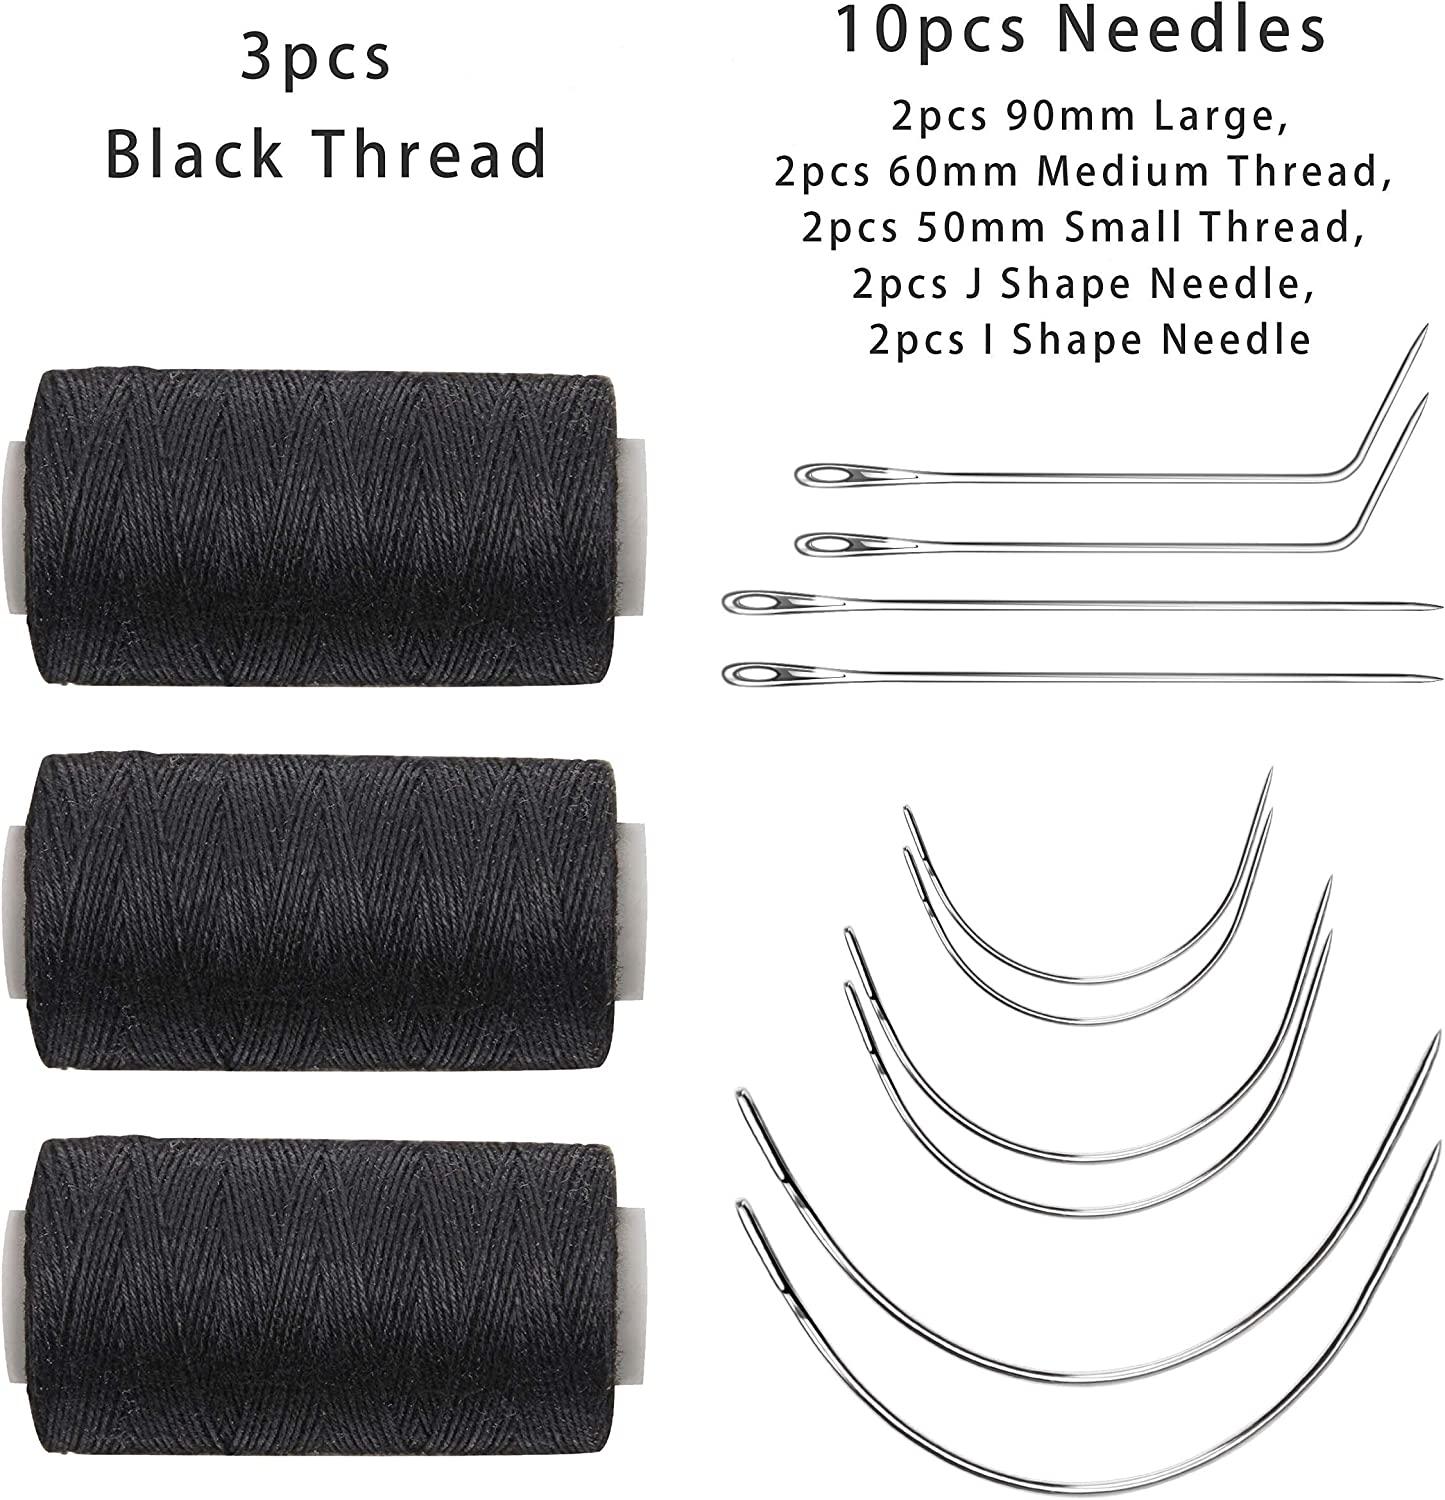  26pcs Thread and Needle Kit, C J Shaped Curved Needles  3-Colored Thread and Needle Weaving Combo with Threader Sewing Accessories  and Supplies for Making Wigs Sewing Hair Weft Braid Extension